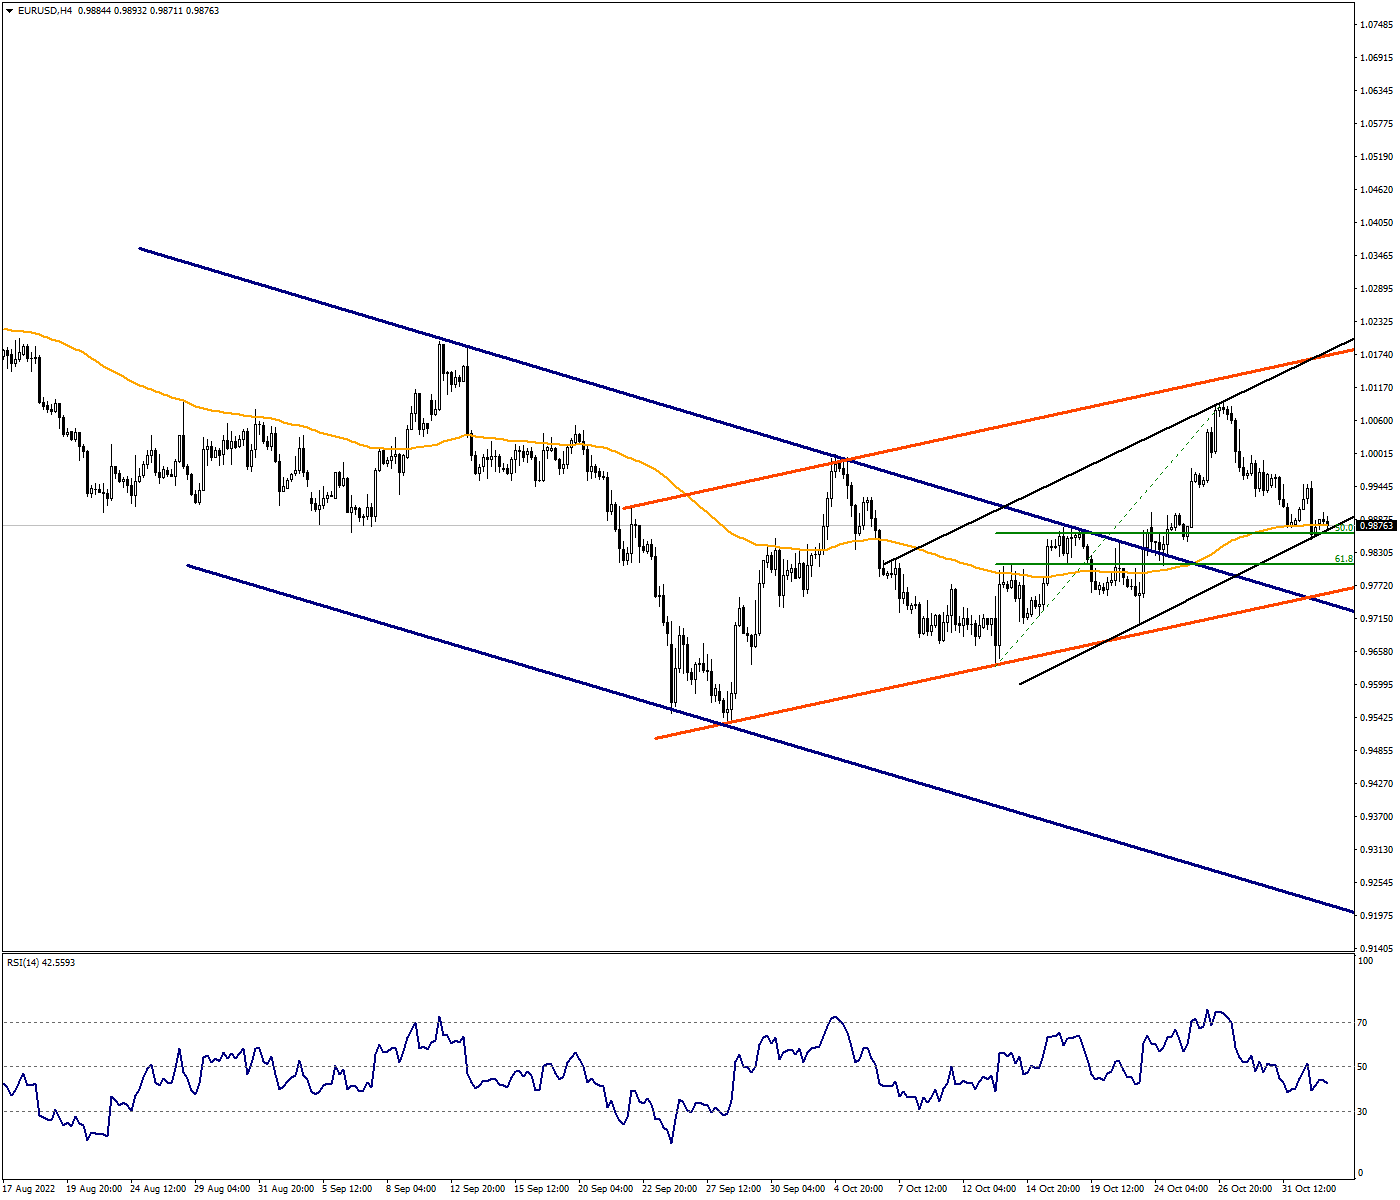 EURUSD's Recovery Path Continues